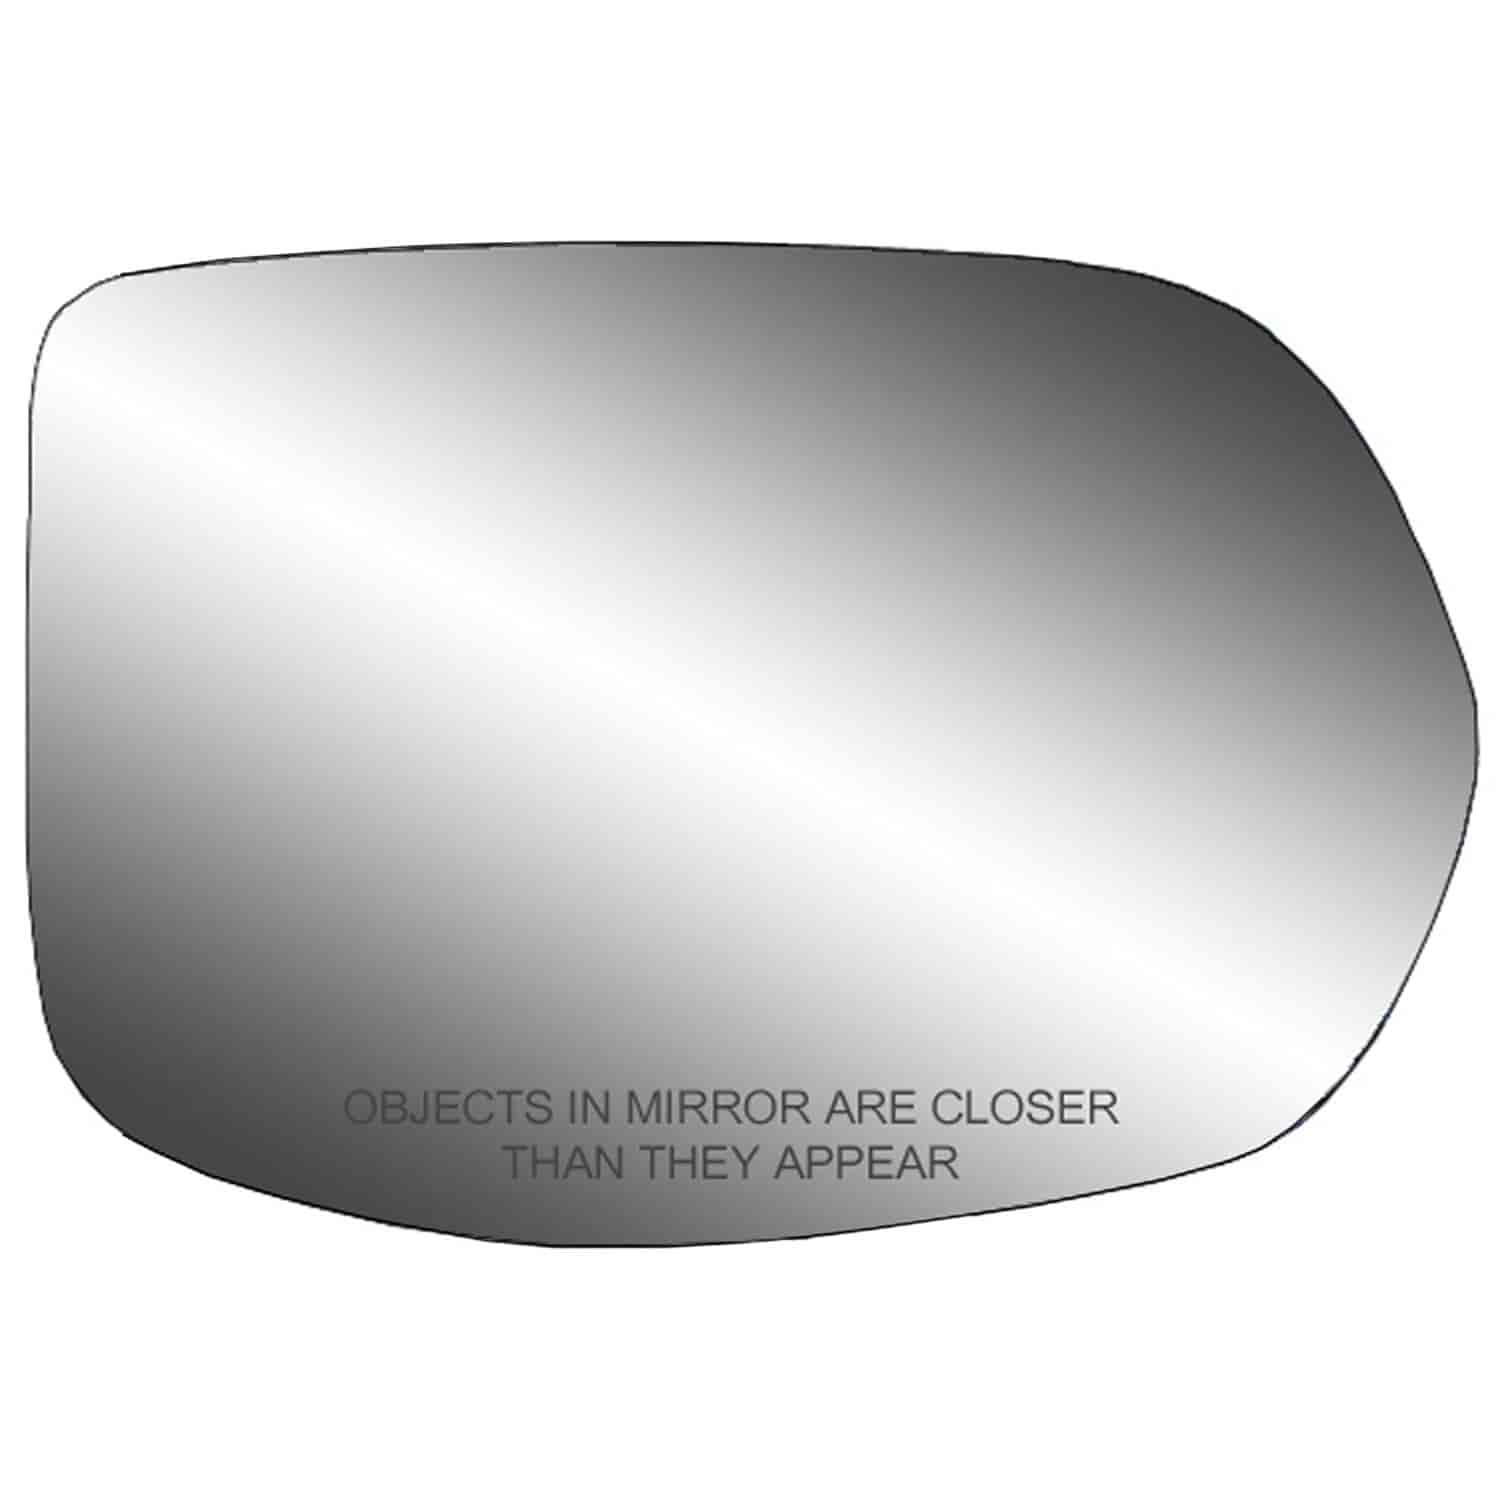 Replacement Glass Assembly for 12-14 CR-V replace your cracked or broken passenger side mirror glass